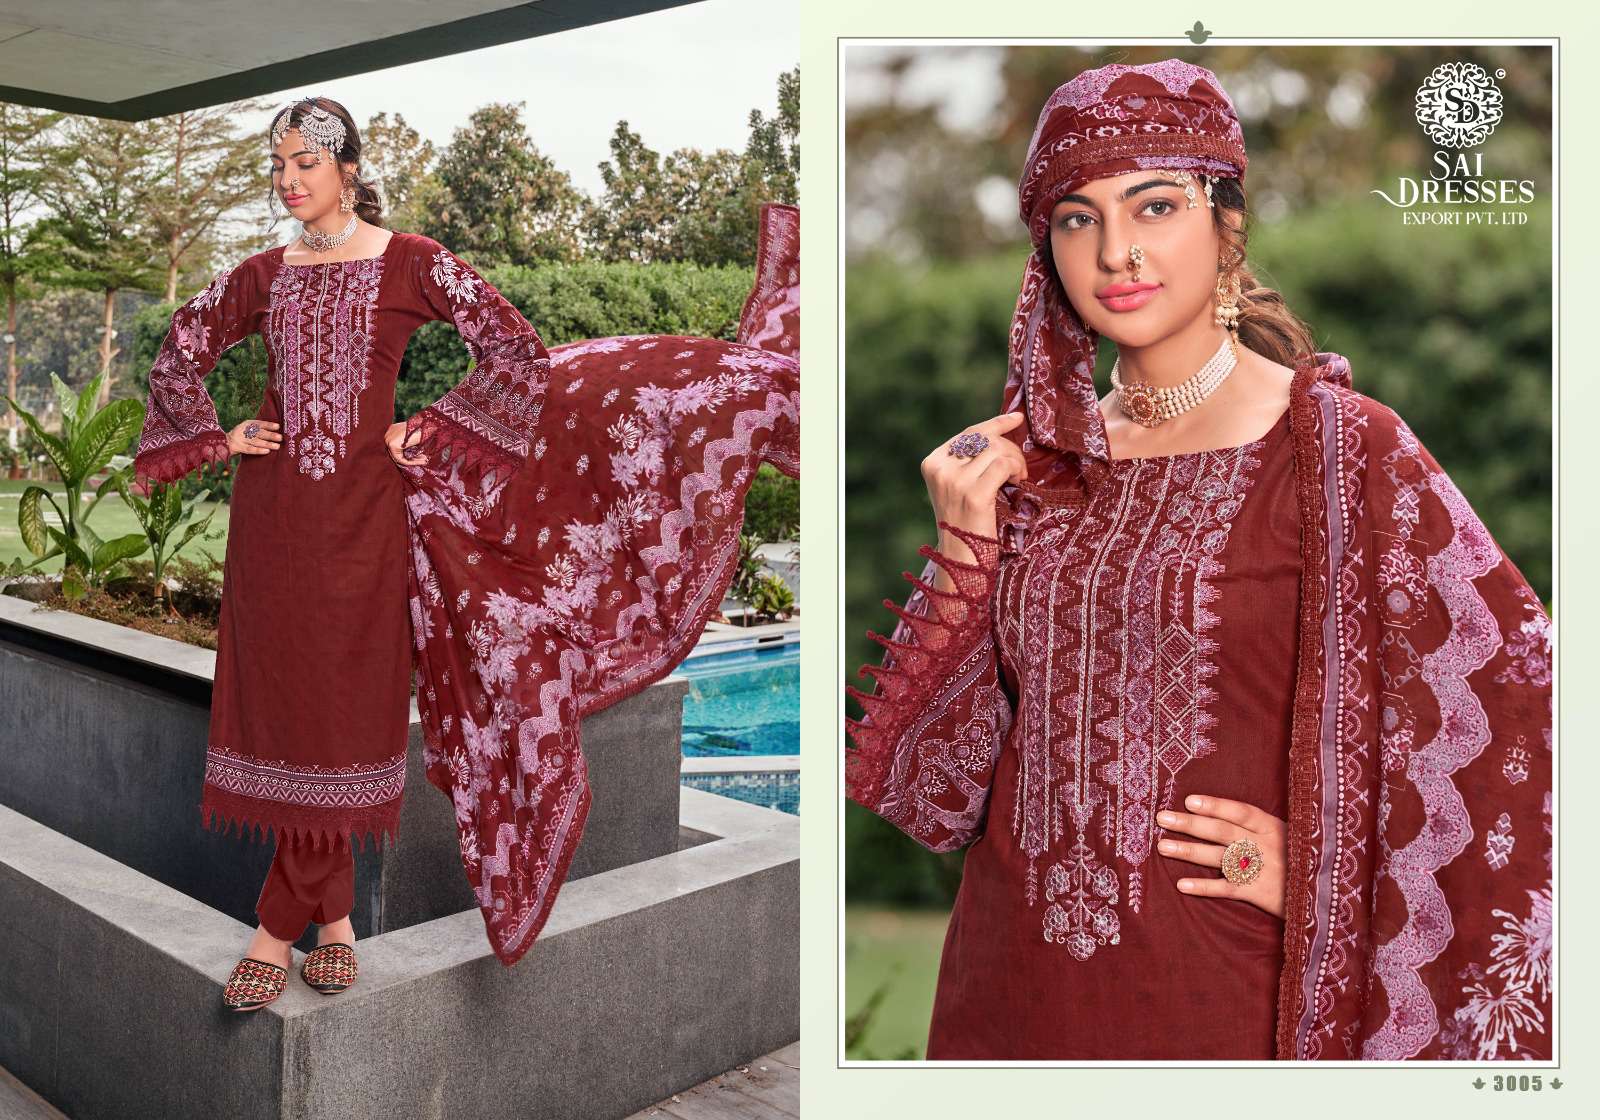 SAI DRESSES PRESENT MUSHQ PRINT WITH EMBROIDERED PAKISTANI SUMMER COLLECTION IN WHOLESALE RATE IN SURAT